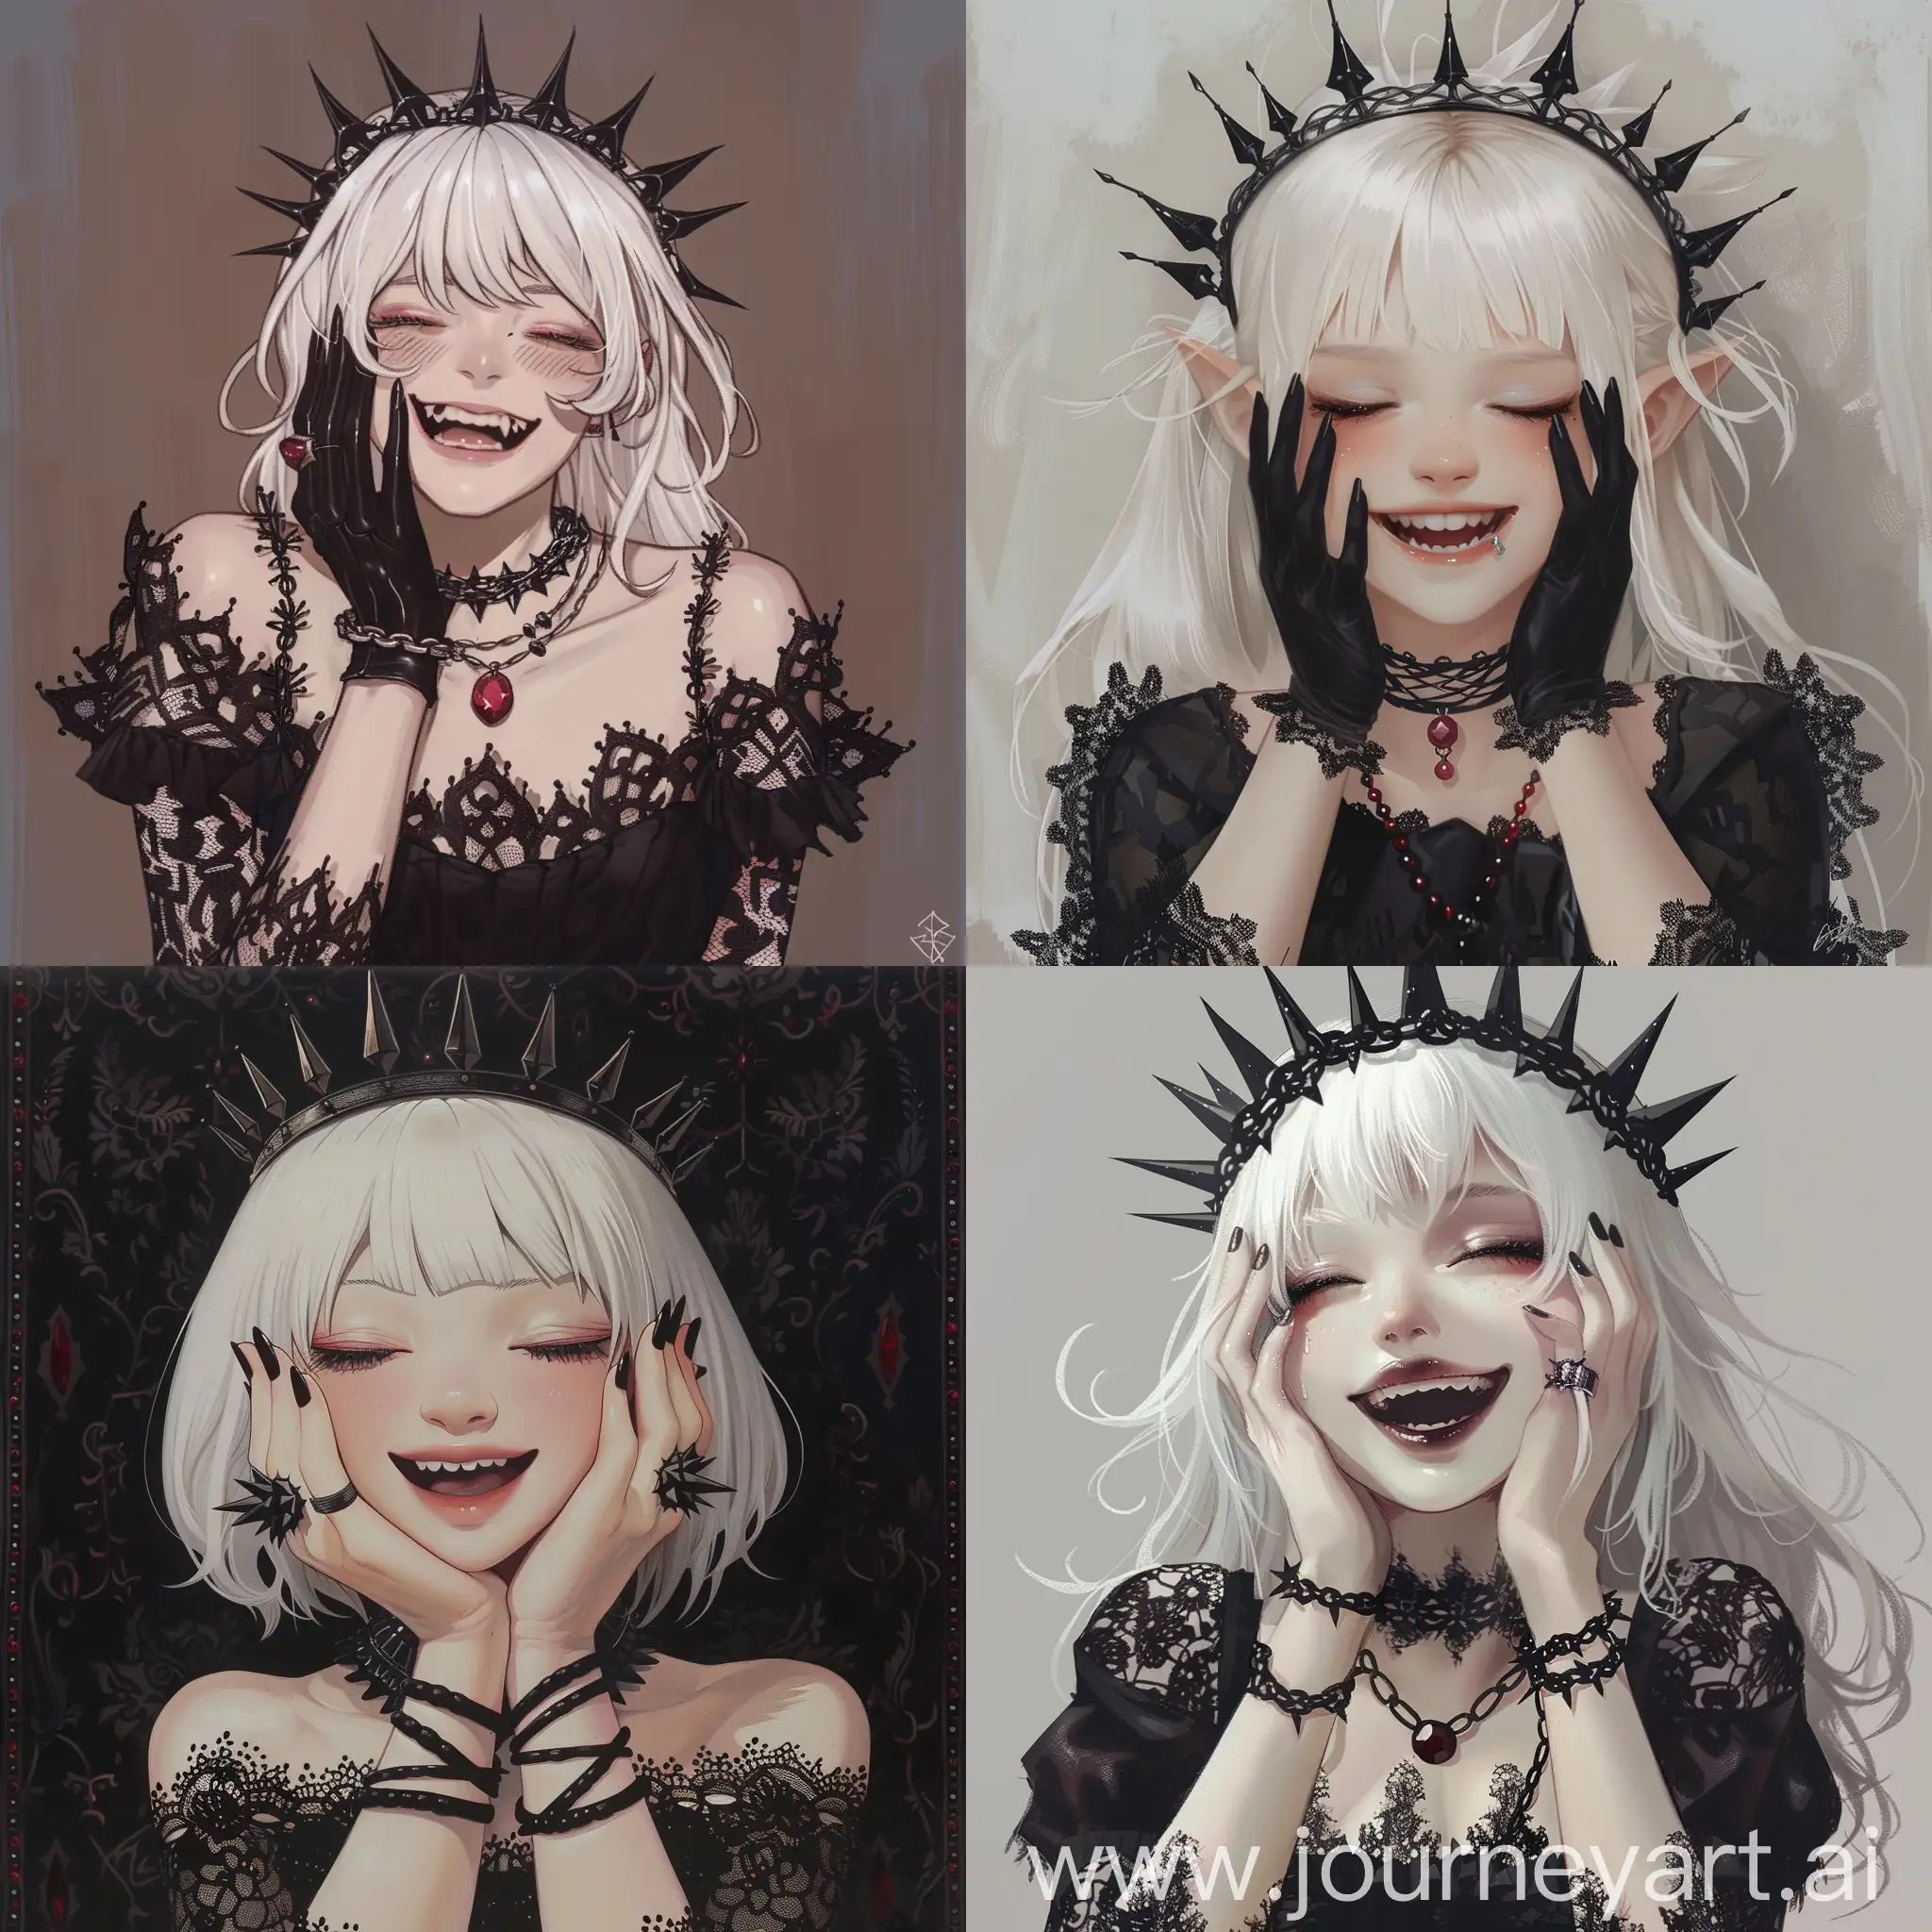 anime art style, both hands on cheek, eyes closed, white hair, a little pale skin, black spikey crown at her head, female, black nail varnish, anime art style 2d, in black laced dress, profile picture style, blushing a little, dark red ruby necklace with black chains, she is smiling or laughing while her hands are on her cheek